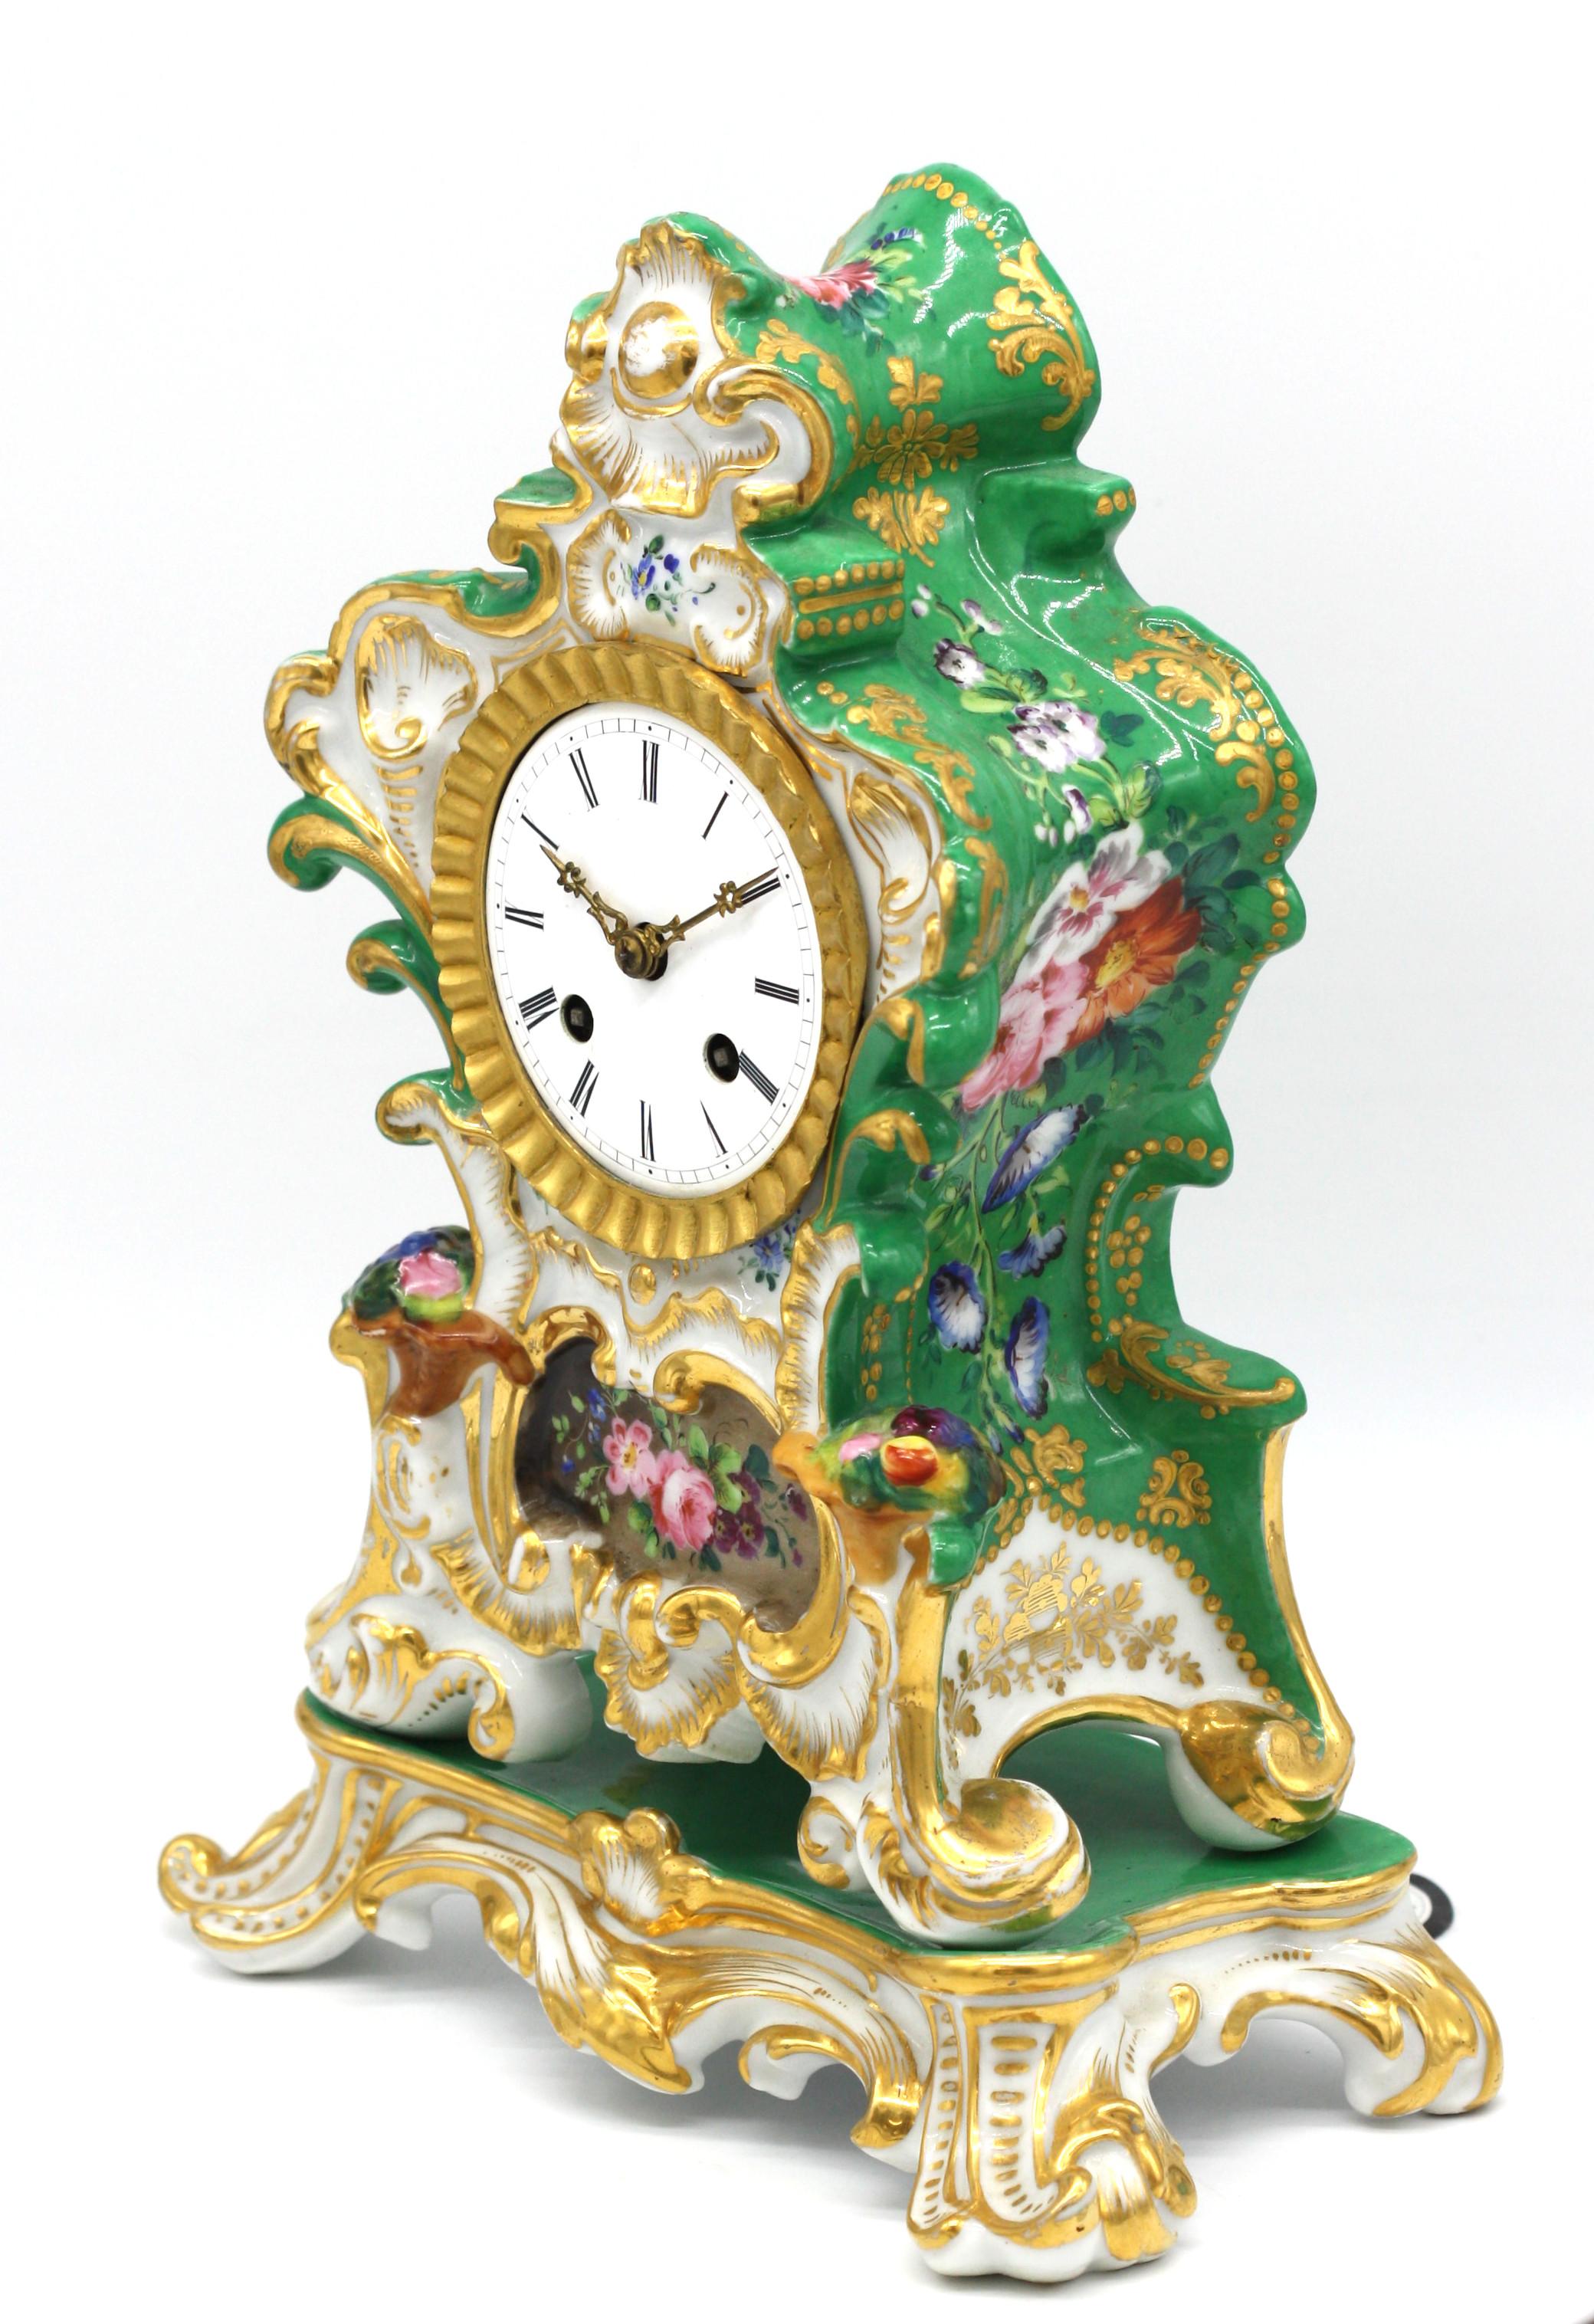 Old Paris porcelain mantel clock and stand,
French. Late 19th century.
Movement stamped 
Raingo Fres Paris
The circular dial with Roman numerals housed within the scroll case, on a conforming stand.
Measures: height 10.75 in. (27.30 cm.), width